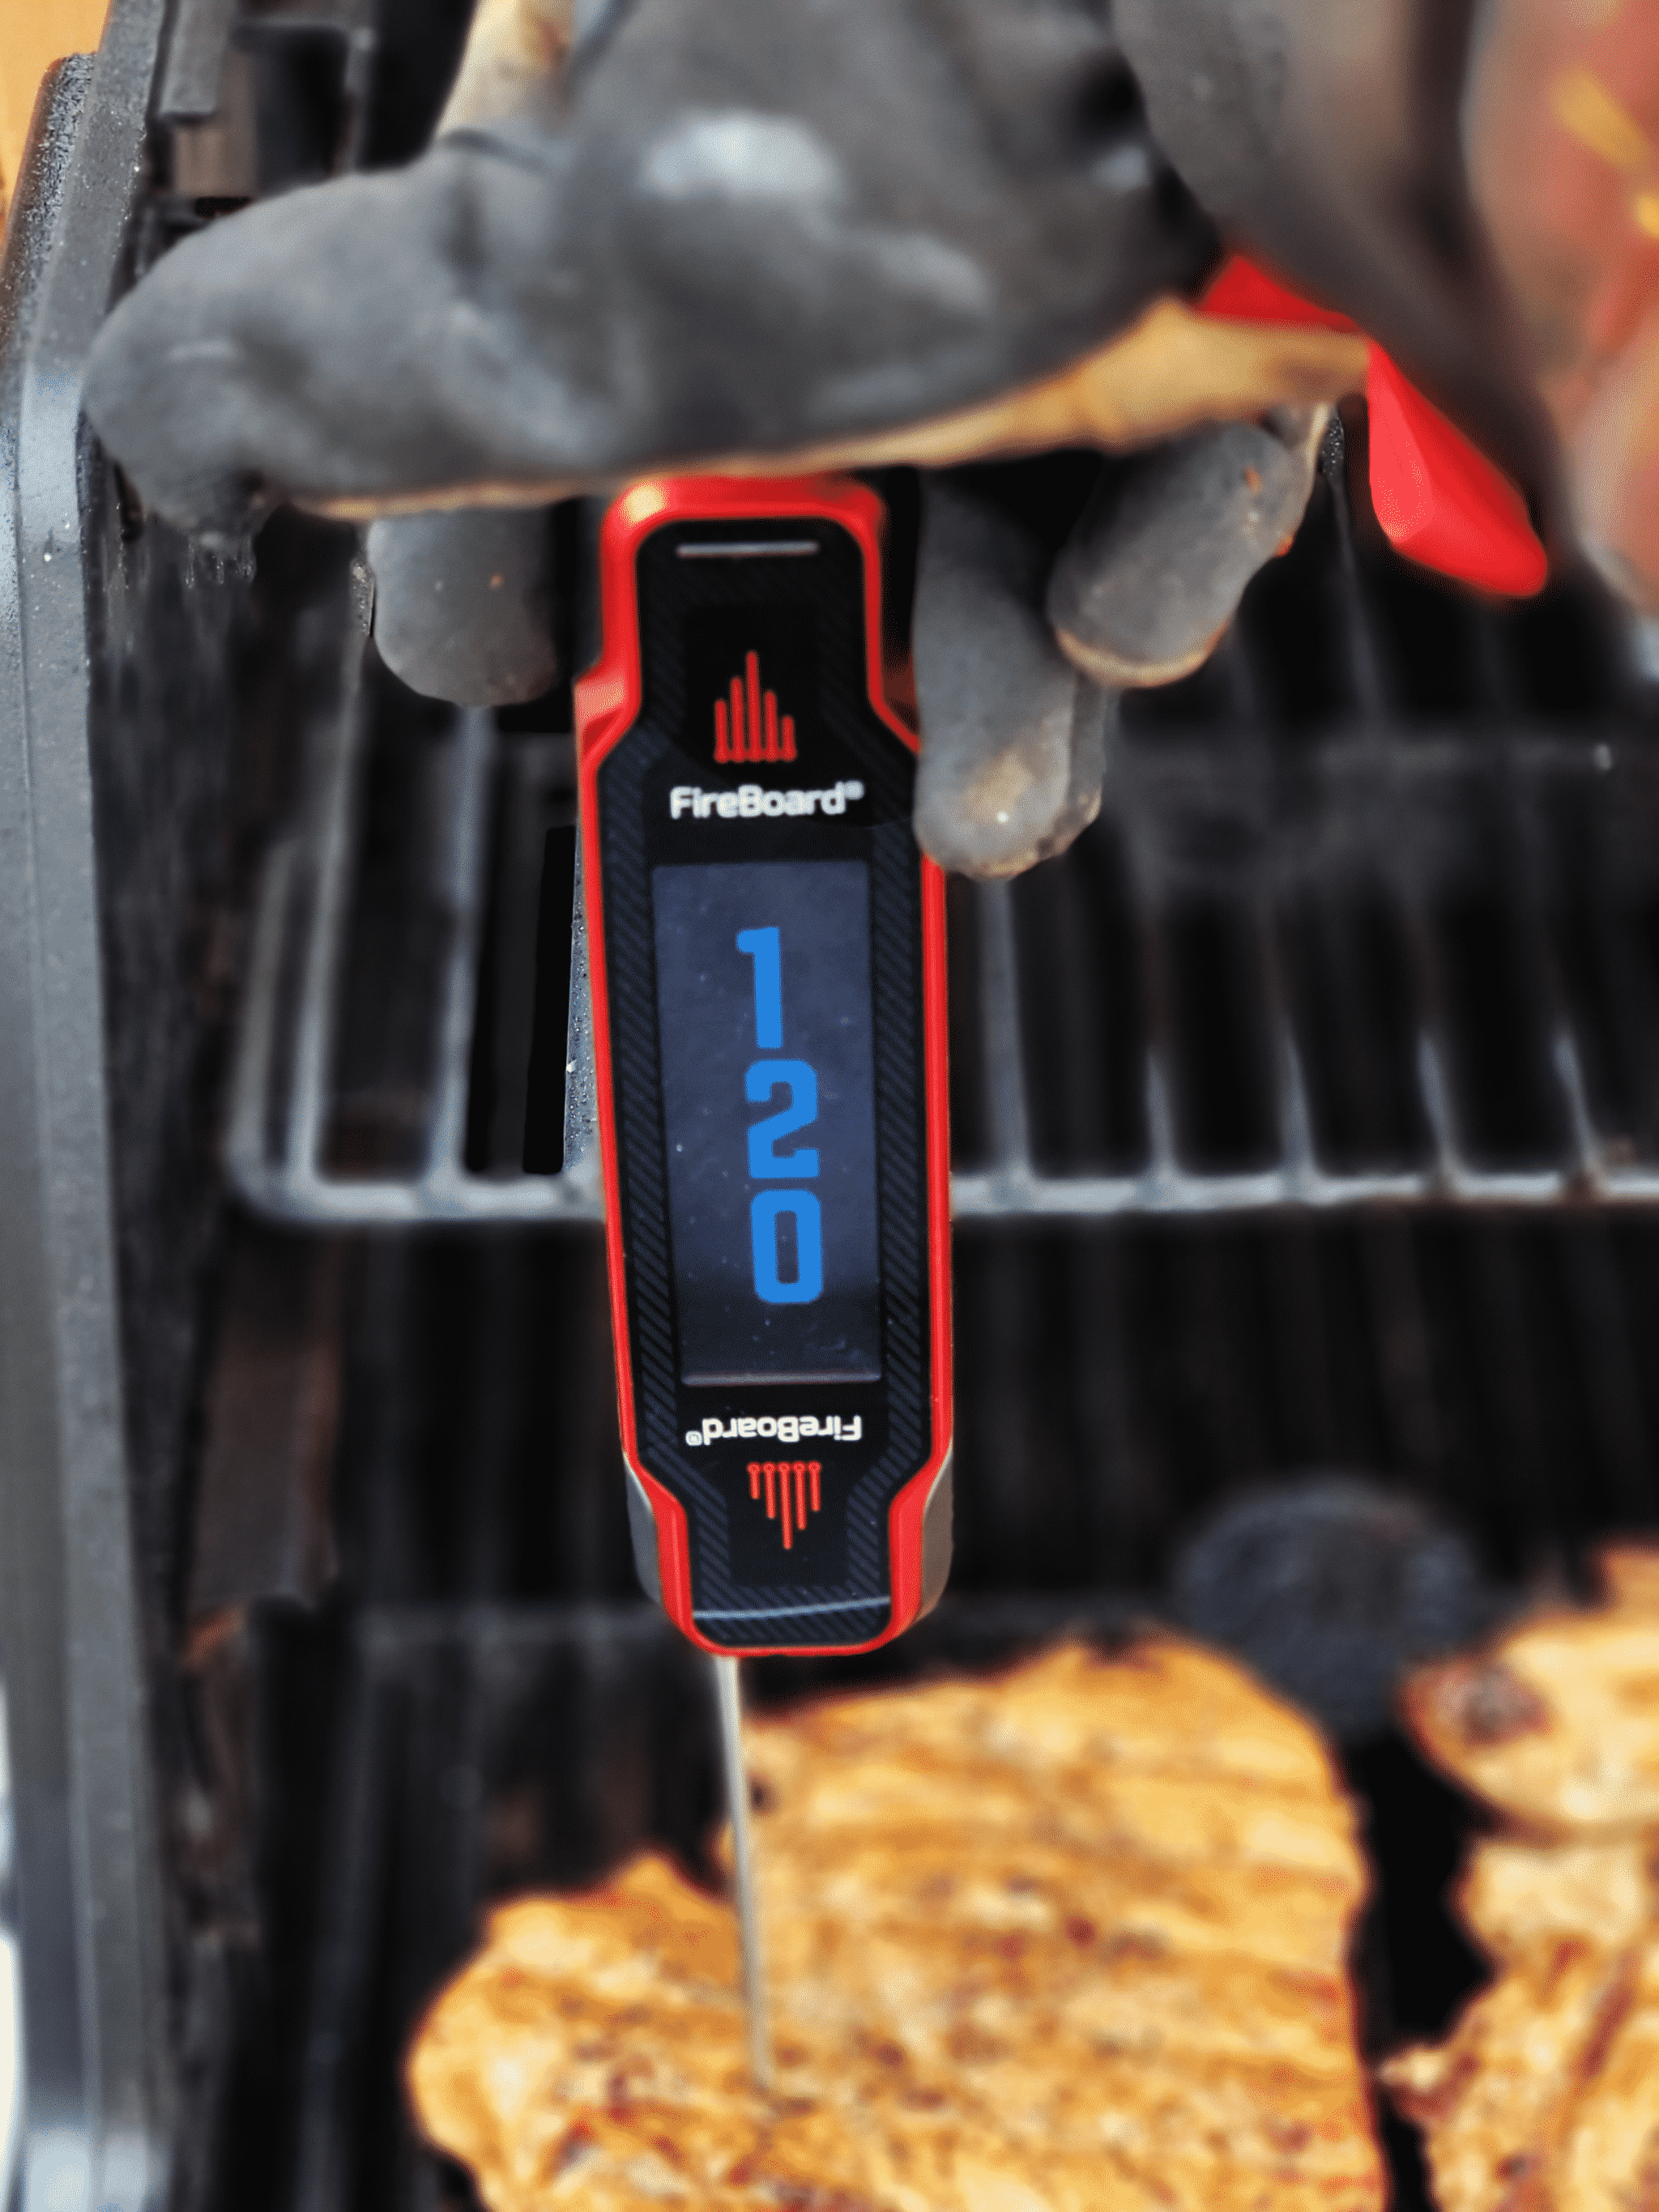 thermometer reading 120 degrees in some food